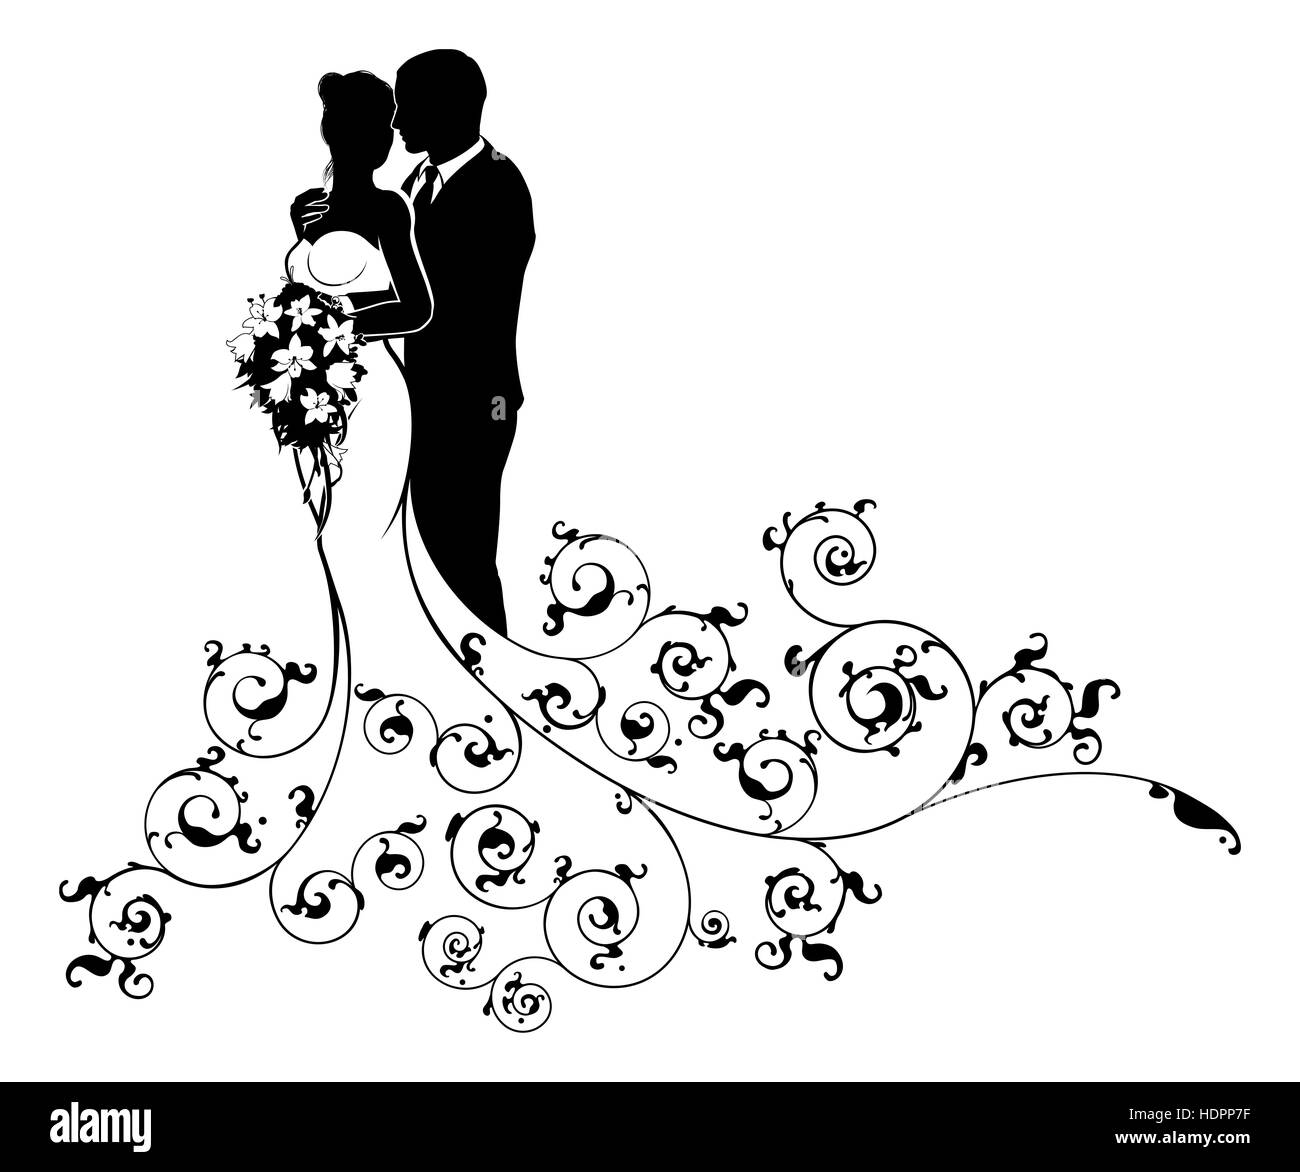 A bride and groom wedding couple in silhouette with a white bridal dress gown holding a floral bouquet of flowers and an abstract floral pattern conce Stock Photo